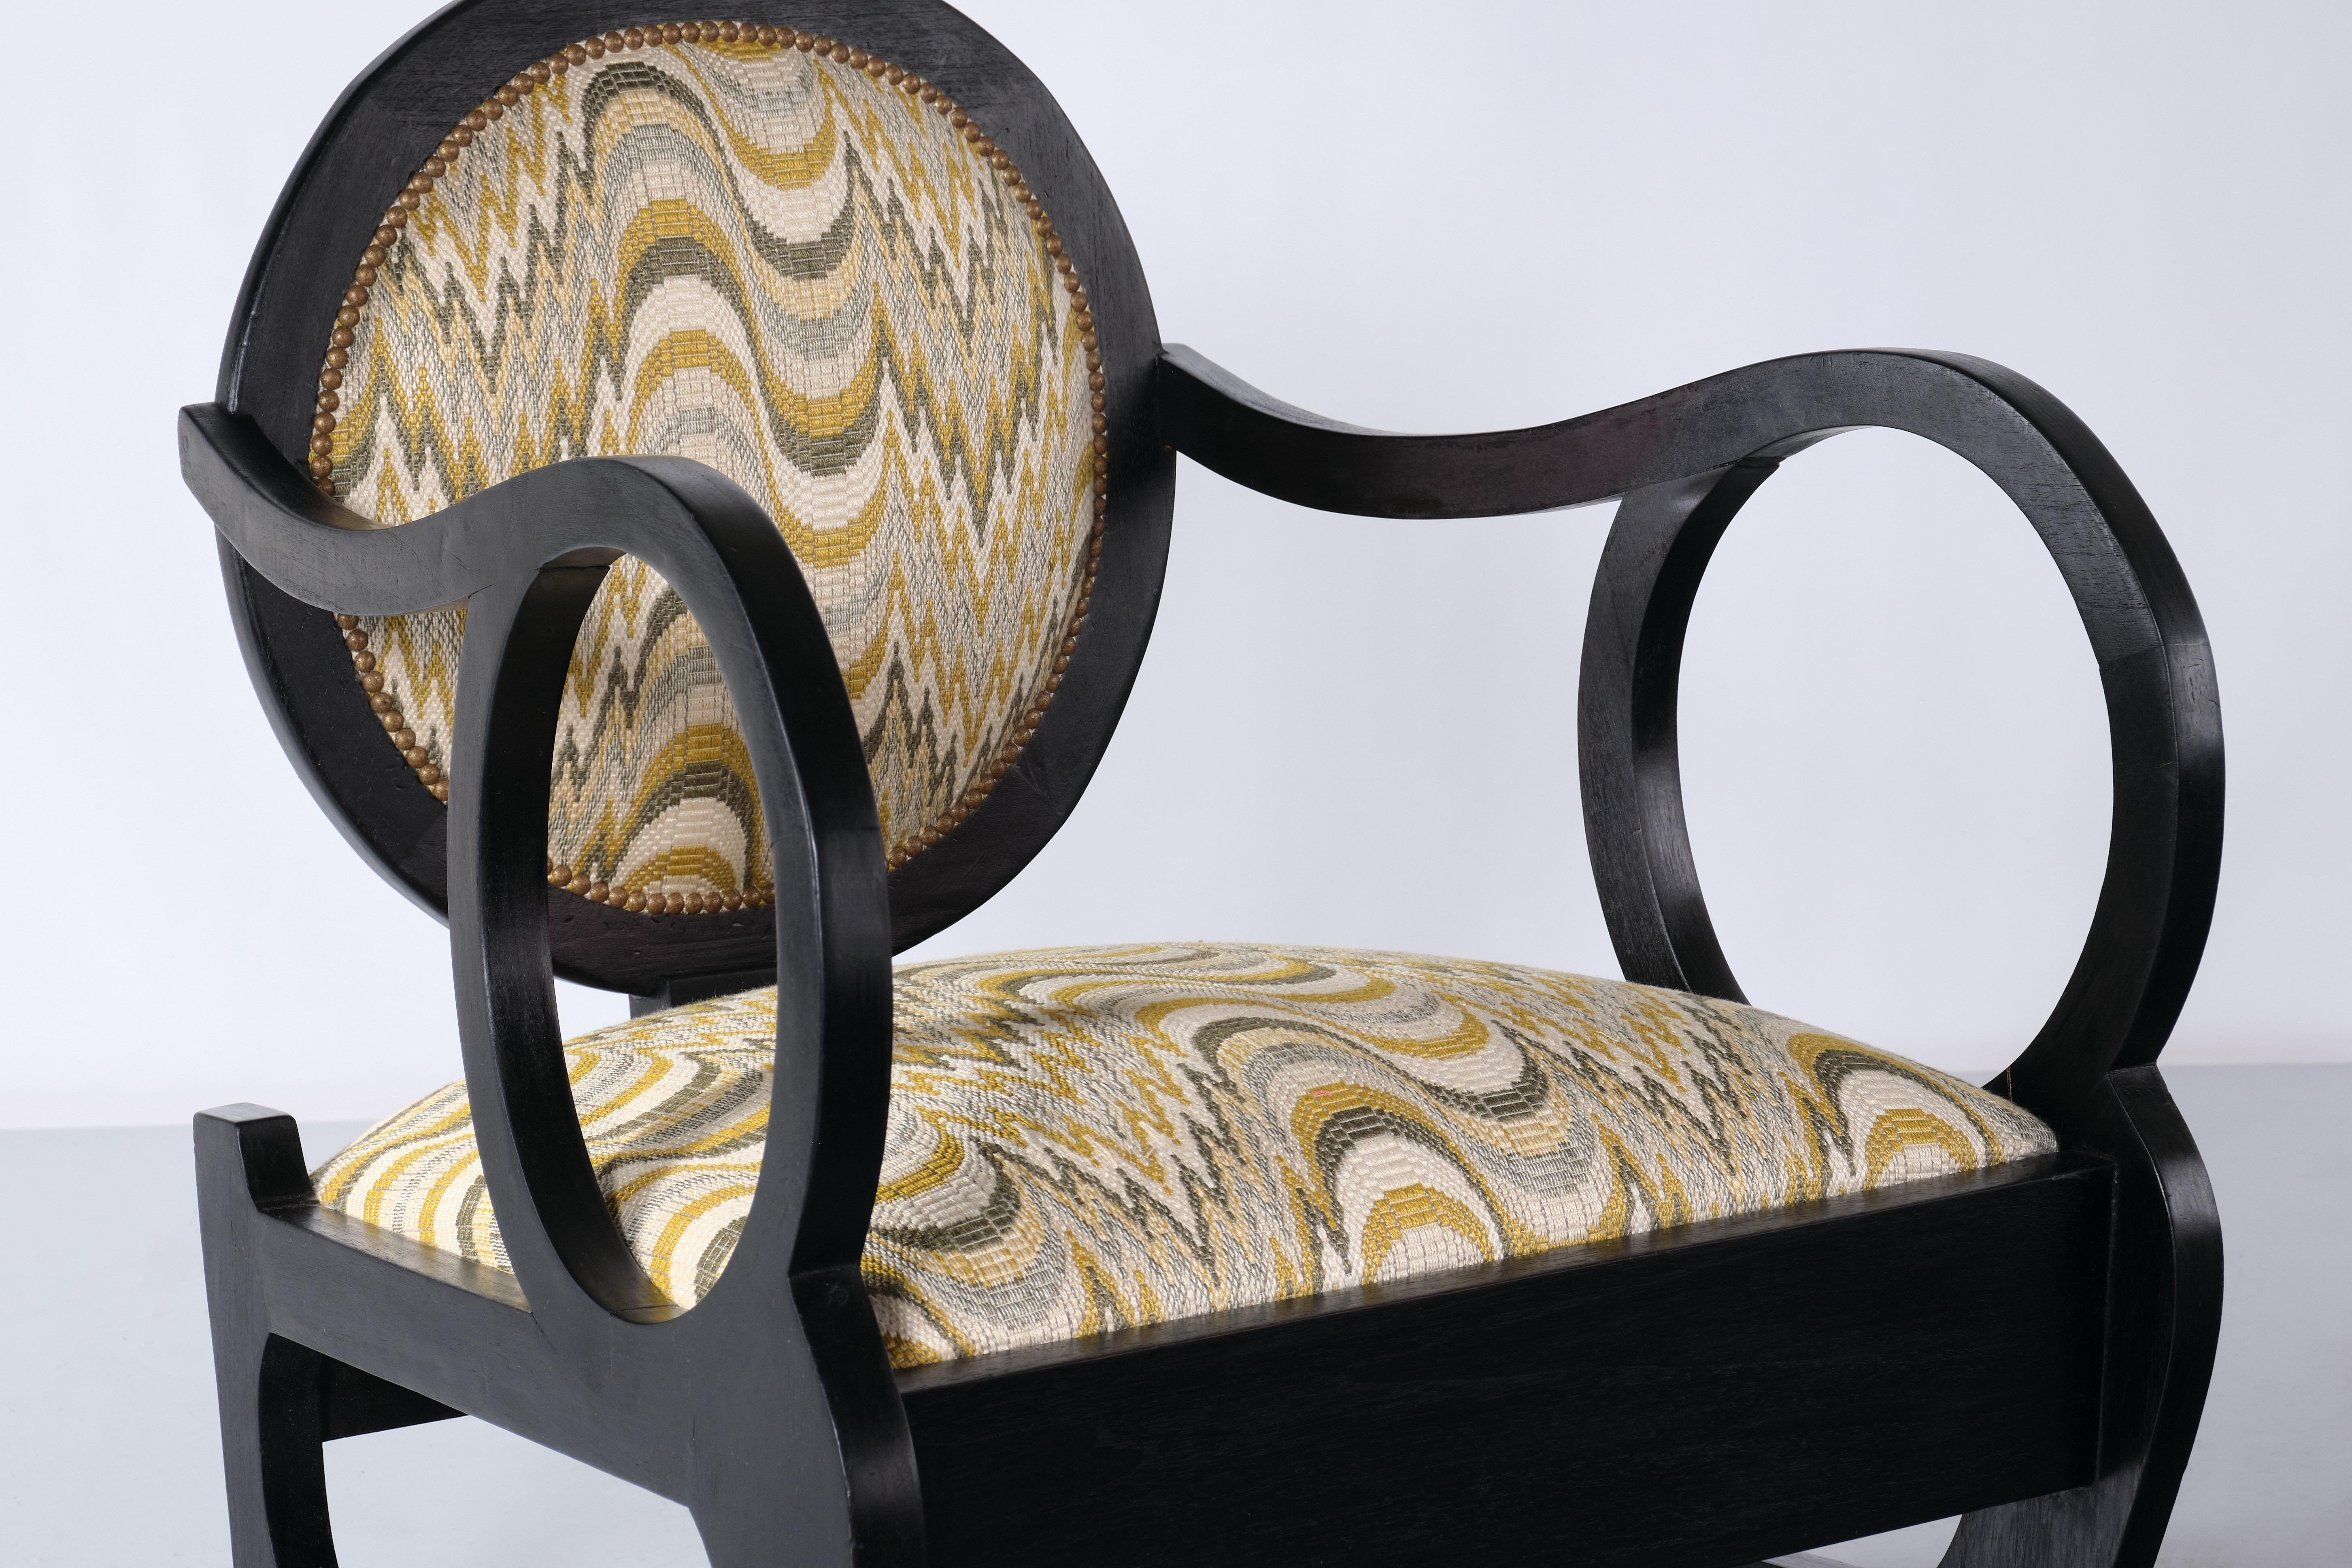 Fabric Pair of Lajos Kozma Attributed Armchairs in Oak and Dedar Jacquard, Late 1940s For Sale